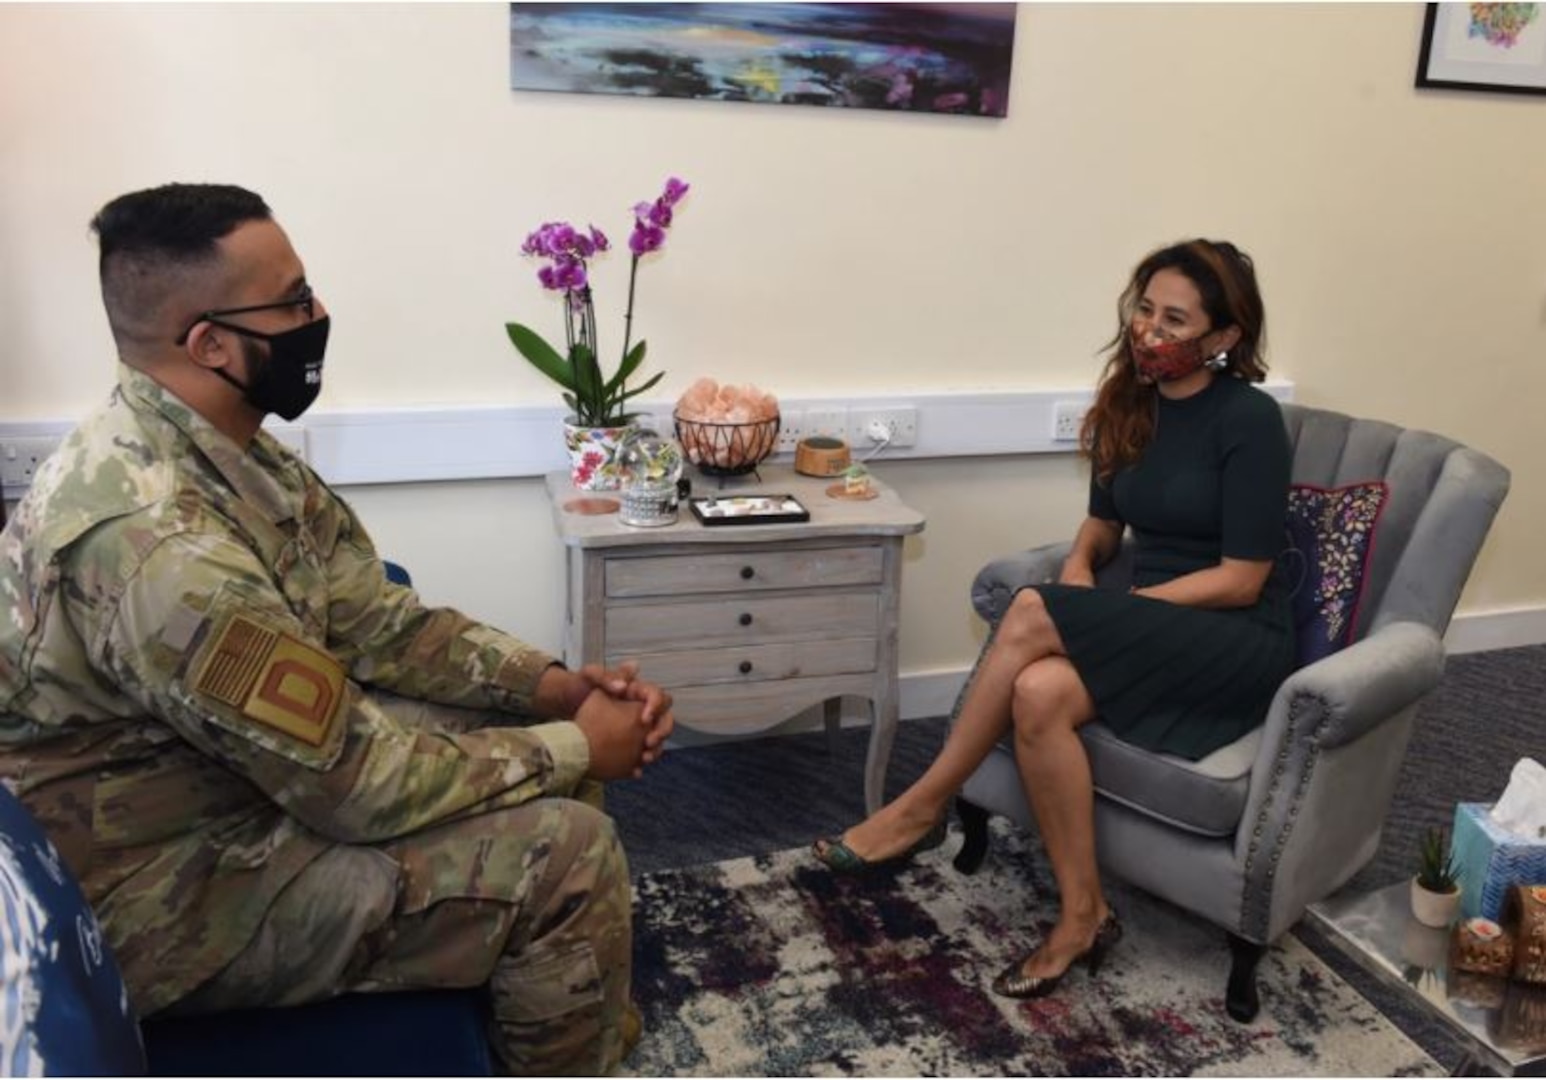 U.S. Air Force Staff Sgt. Abdul Sadiq, 100th Security Forces Squadron and Square D Character, Culture and Community administrative support, chats with Dr. Karen Kuemerle-Pinillos, 100th Air Refueling Wing licensed clinical social worker, in the BRIEF Therapy area in the DC3 building at RAF Mildenhall, England, Aug. 2, 2021. The program – Behavioral solutions Refined by Identified problems for Emotional health and Focused goals –helps clients with issues such as stress, anger management and relationship issues. (U.S. Air Force photo by Karen Abeyasekere)